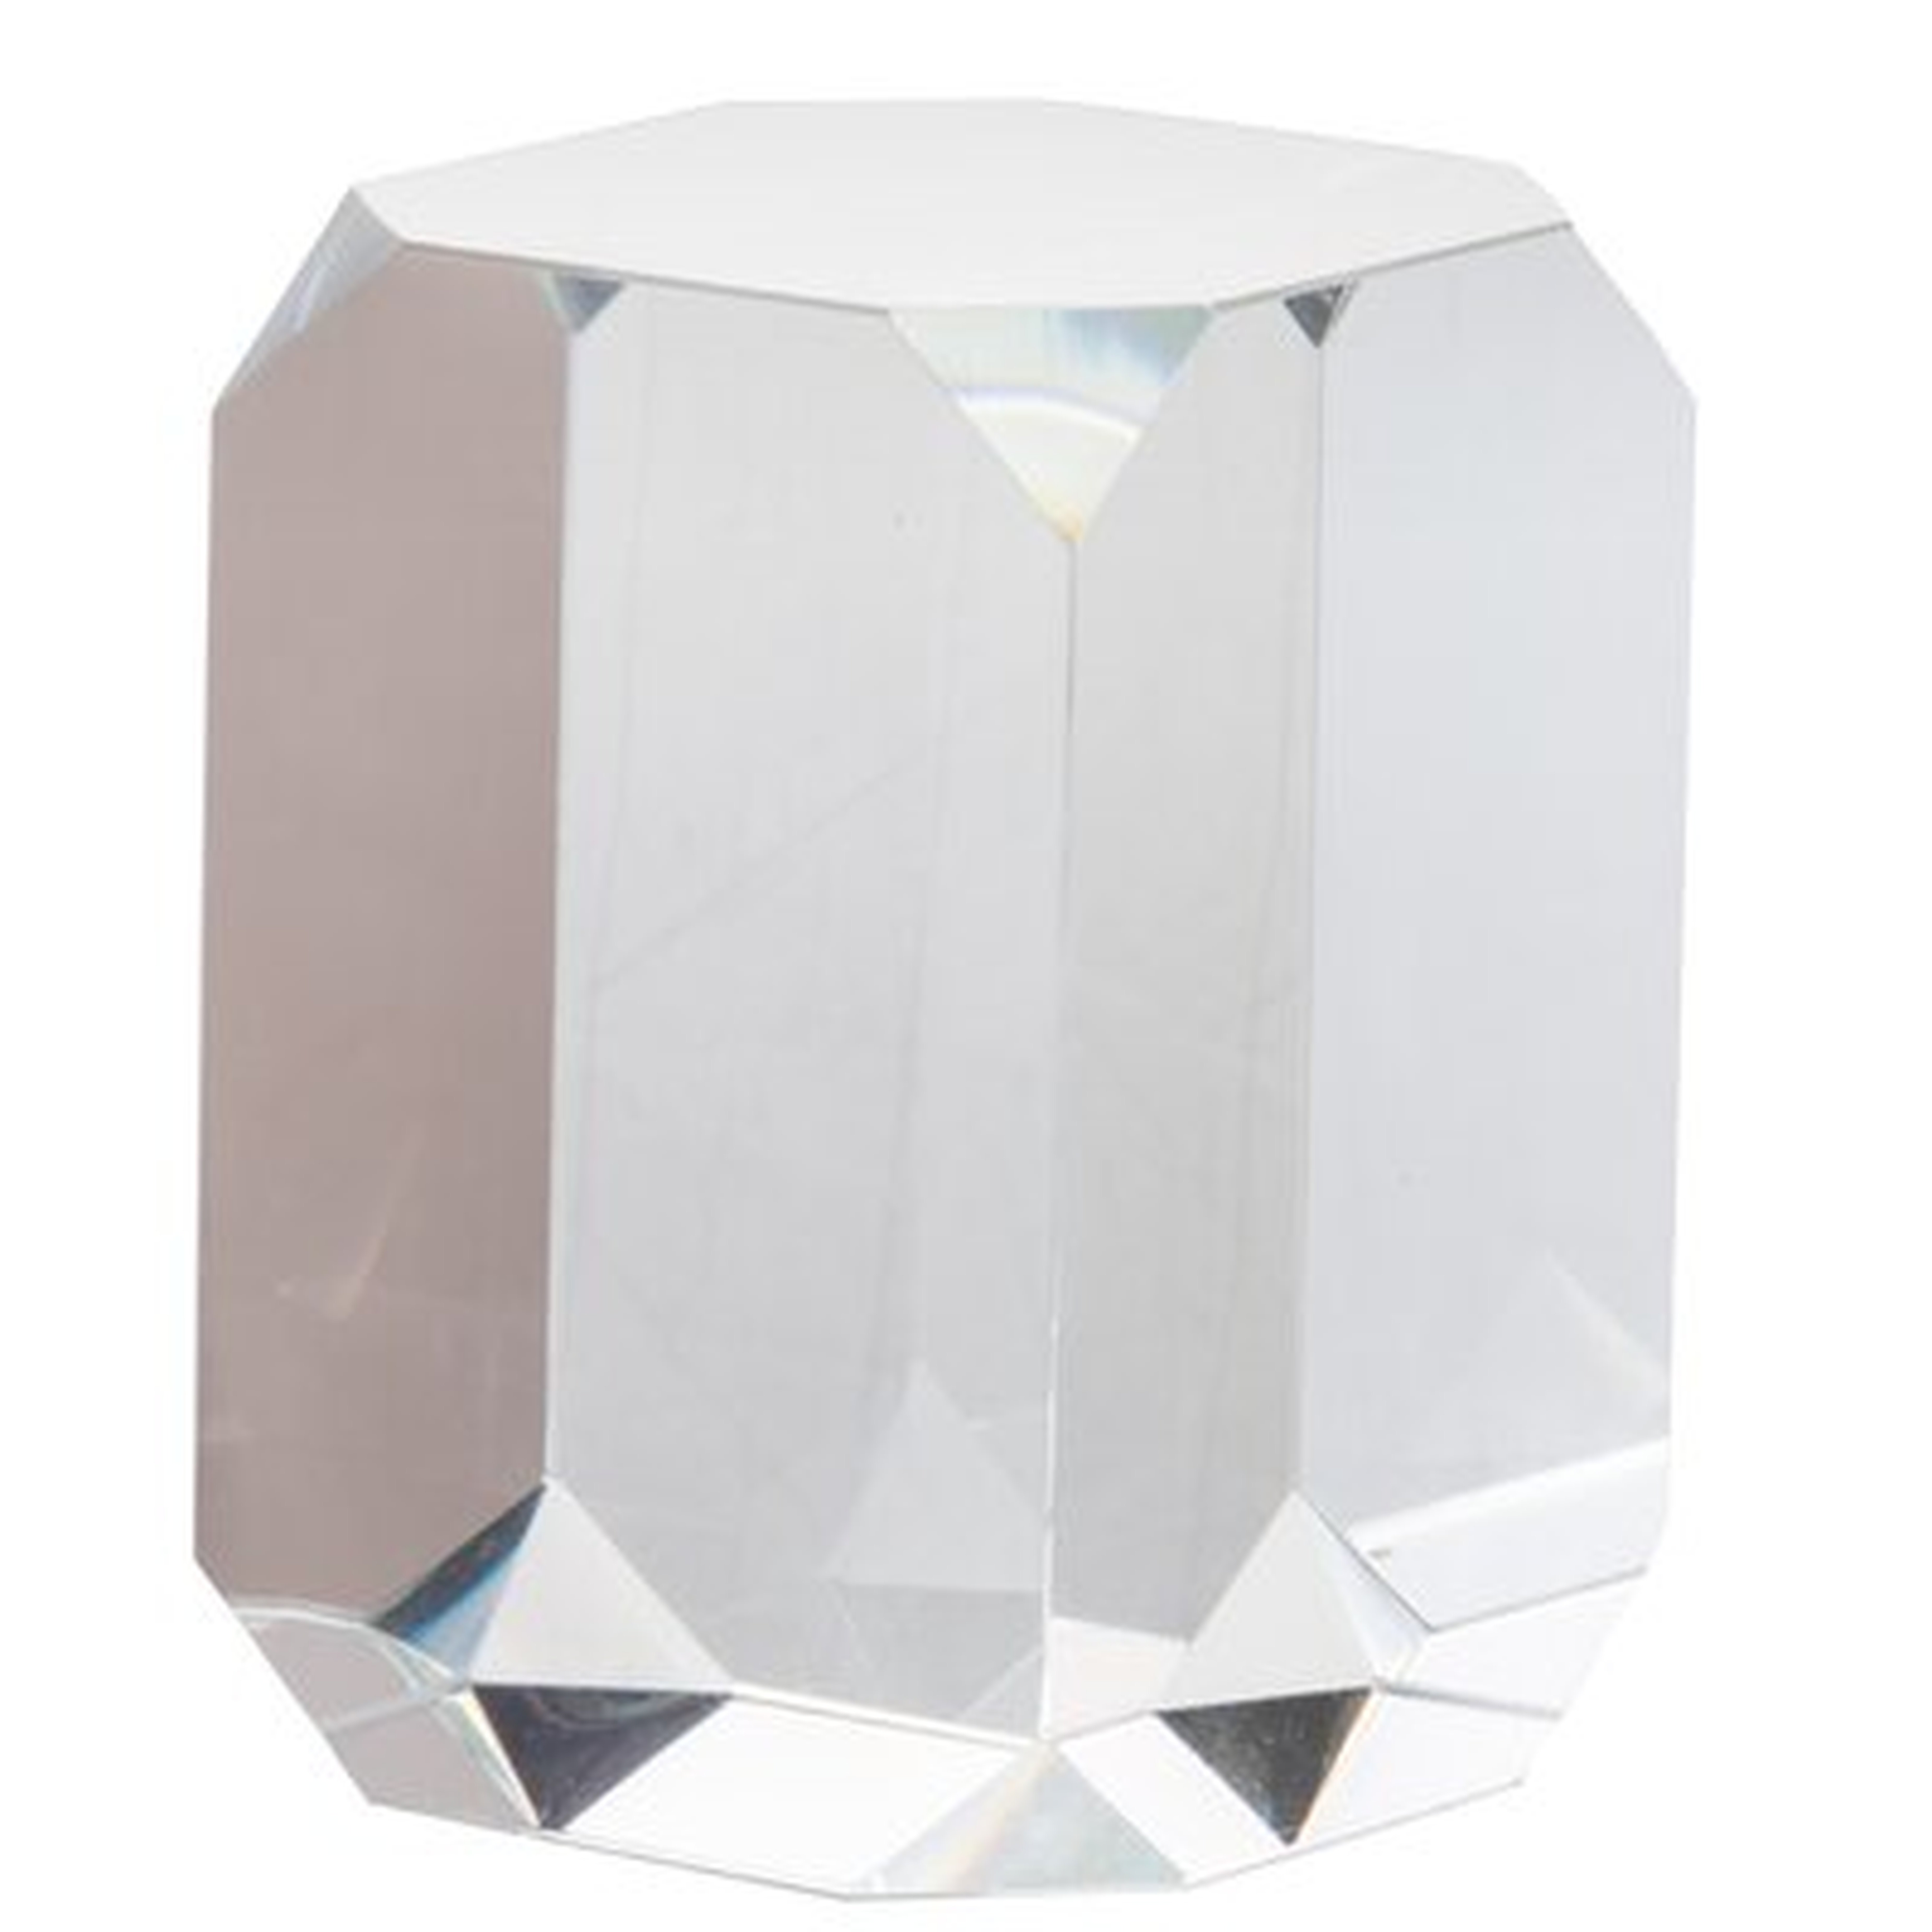 Toxey Modern 3 Square Glass Cube Sculpture - Wayfair